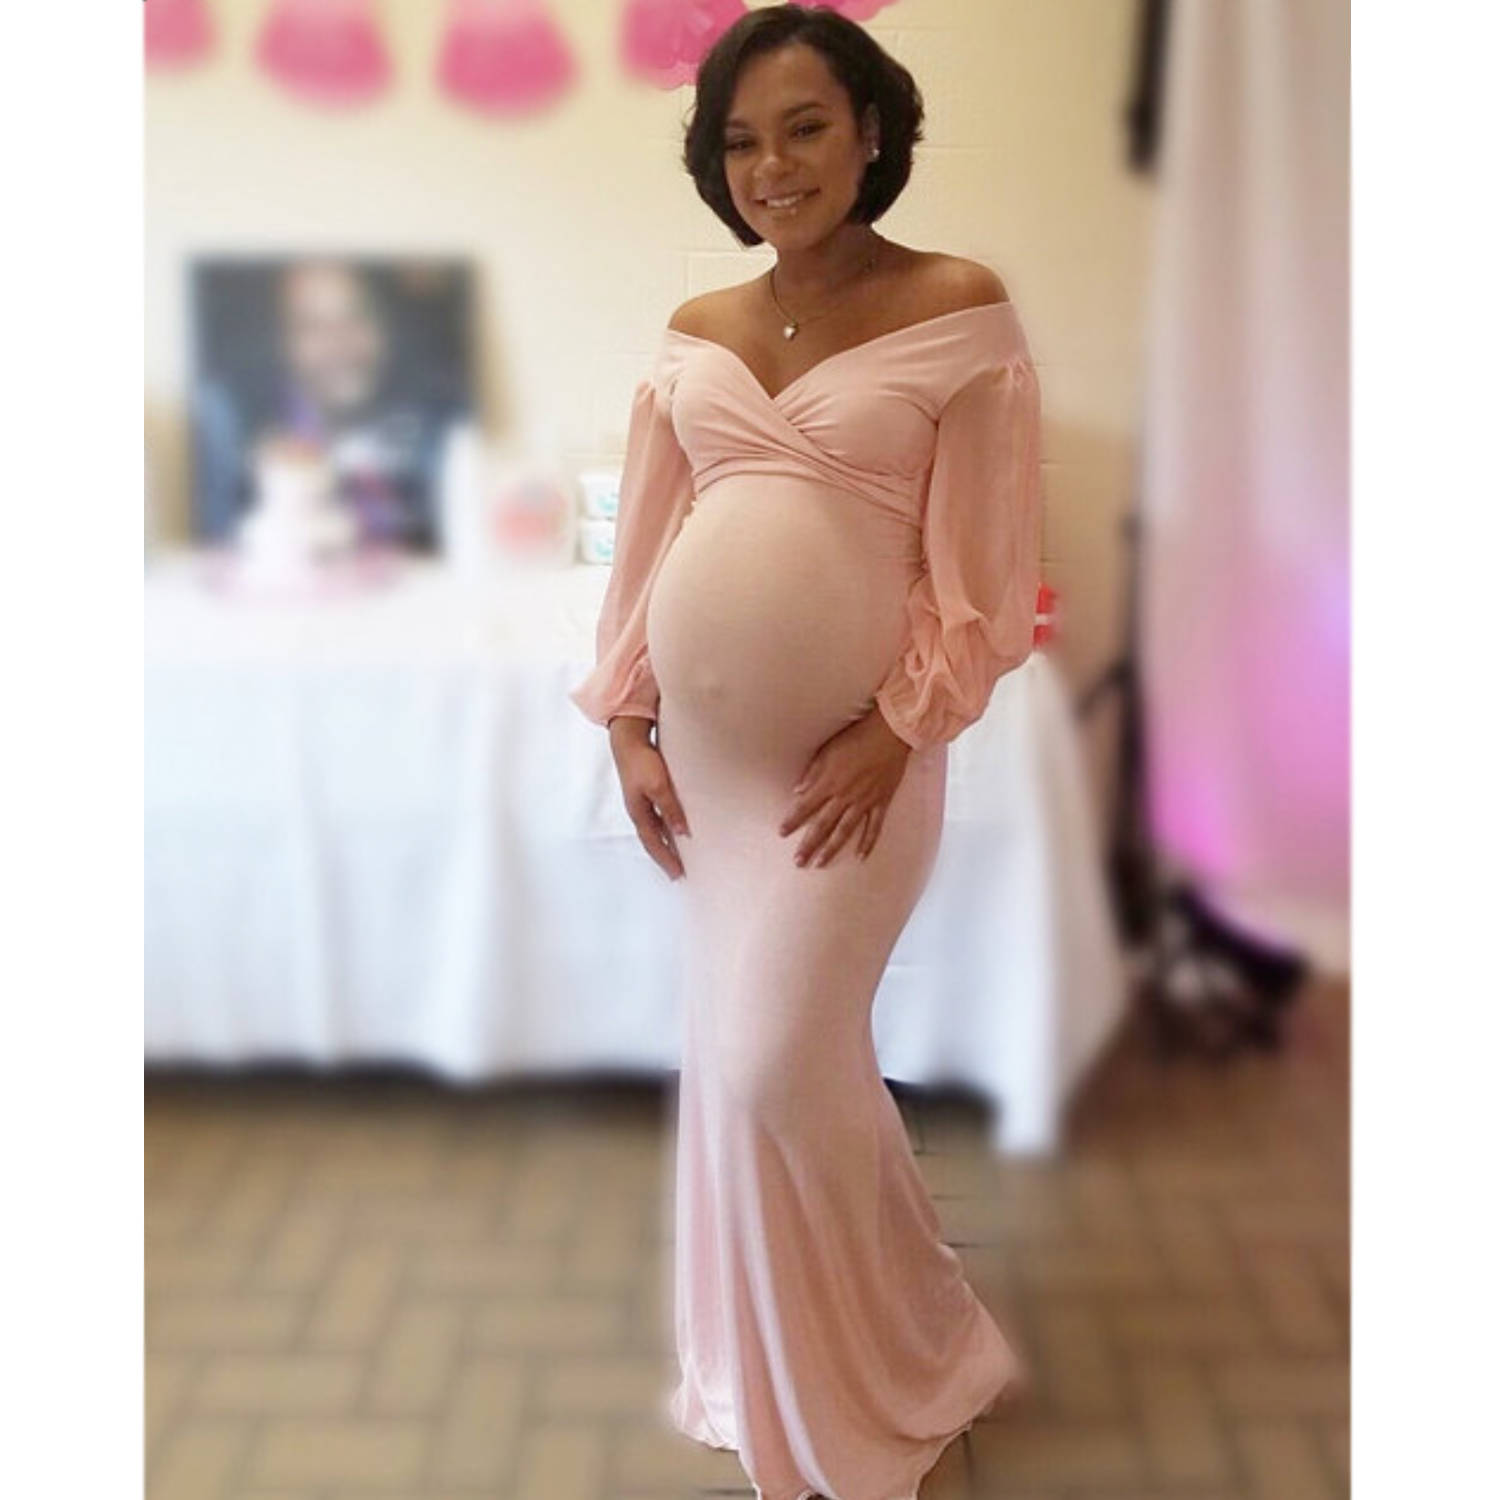 Full Size of Baby Shower:baby Shower Dresses Trendy Affordable Maternity Clothes Inexpensive Maternity Clothes Maternity Dresses For Photoshoot A Pea In The Pod Maternity Clothes Maternity Dresses Formal 2 Searches Left. What Should I Wear To My Baby Shower